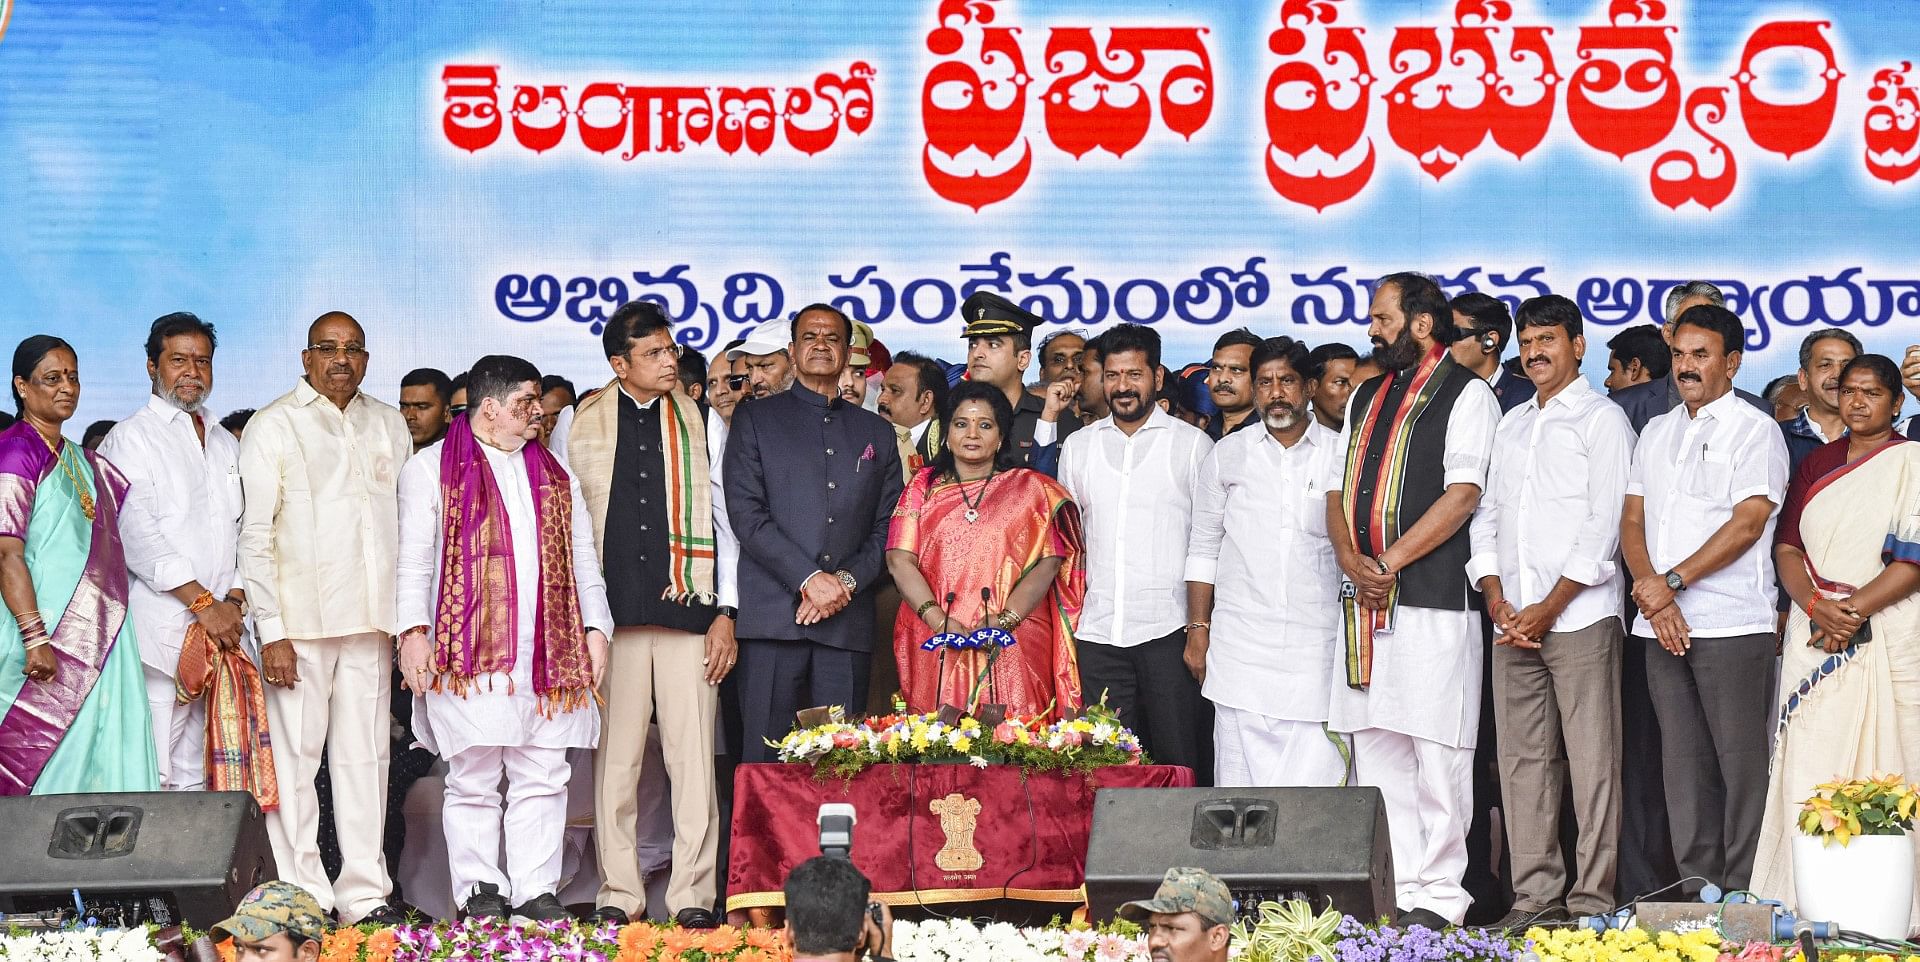 <div class="paragraphs"><p>Chief Minister Revanth Reddy, Deputy Chief Minister Mallu Bhatti Vikramarka, and 10 Cabinet ministers took oath on Thursday, 7 December.&nbsp;</p></div>